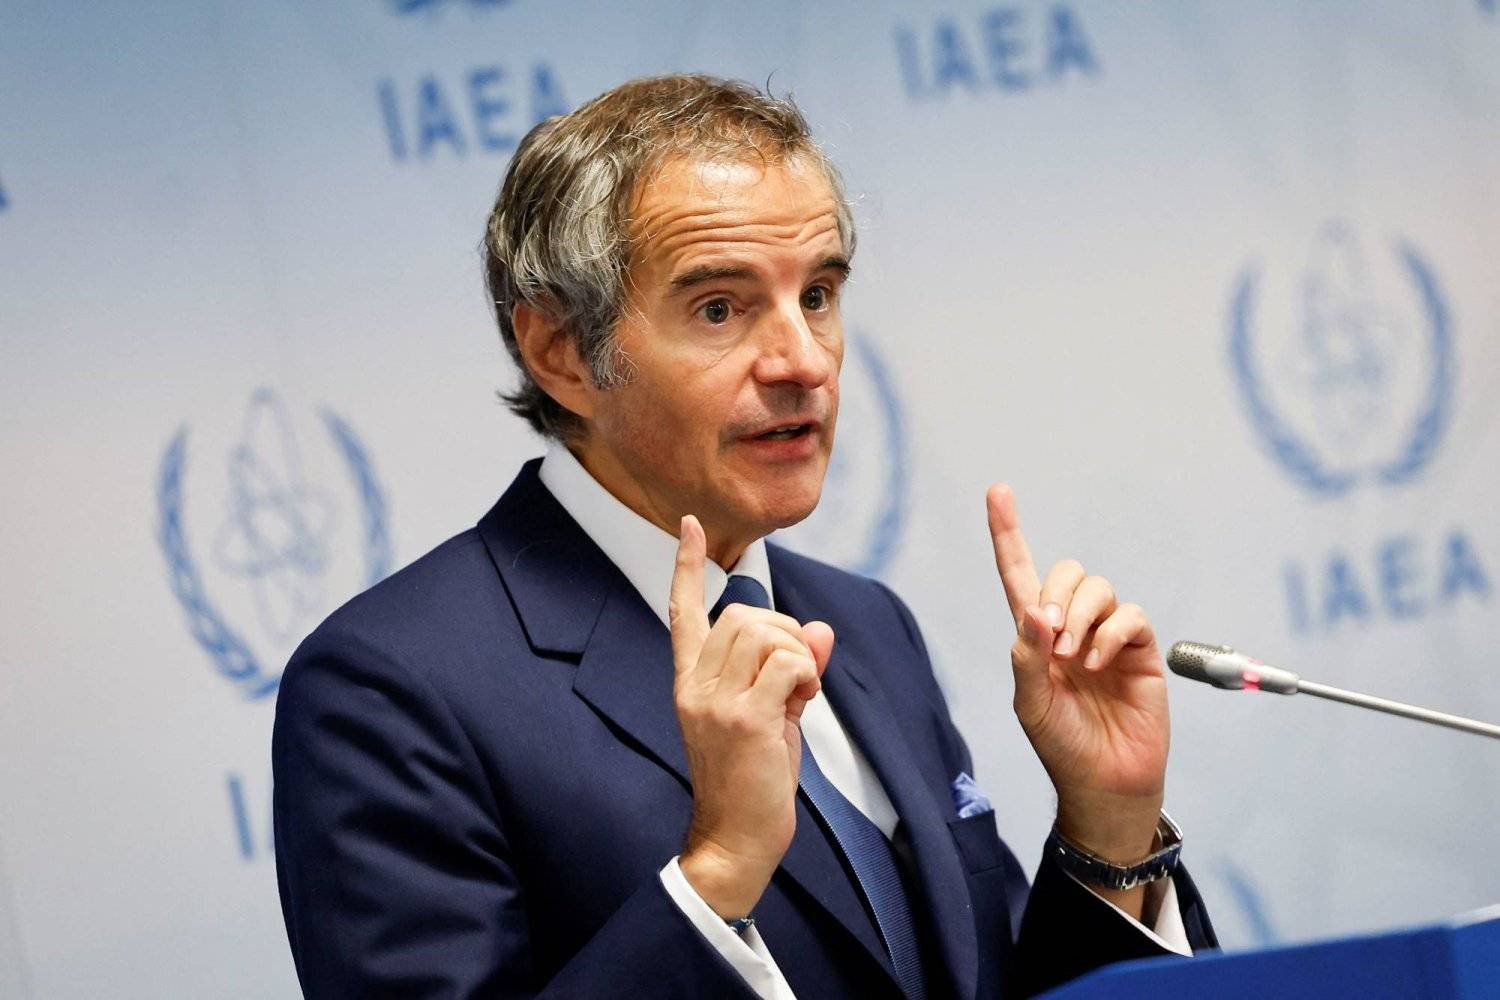 Director General of the International Atomic Energy Agency (IAEA) Rafael Grossi holds a press conference on the opening day of a quarterly meeting of the IAEA Board of Governors in Vienna, Austria, March 4, 2024. REUTERS/Lisa Leutner